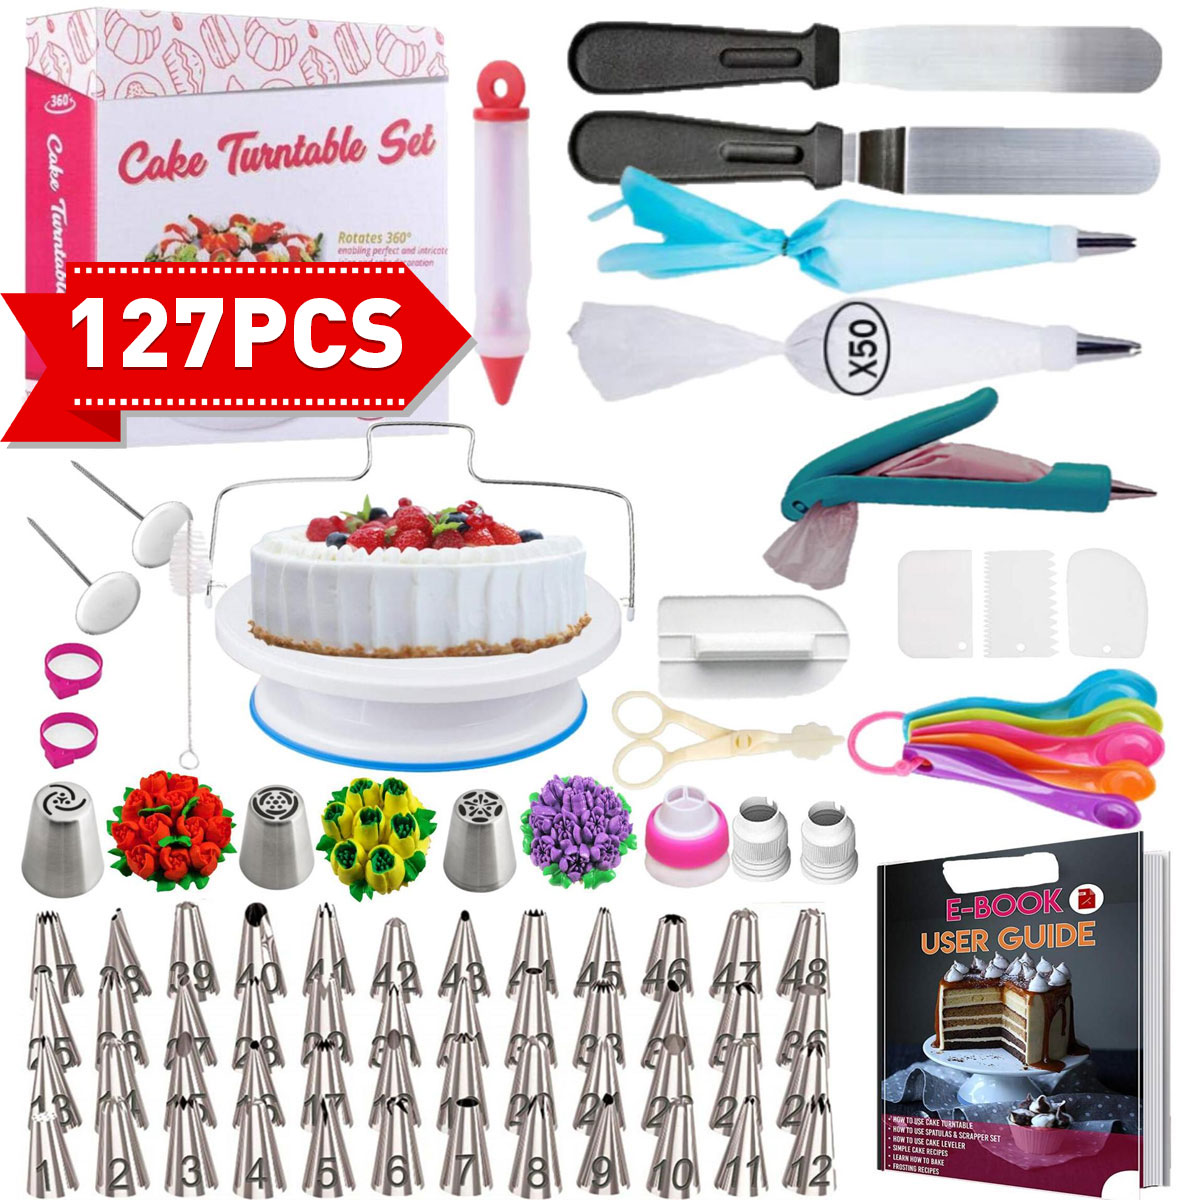 10 best cake decorating tools for beginners and make great cake !